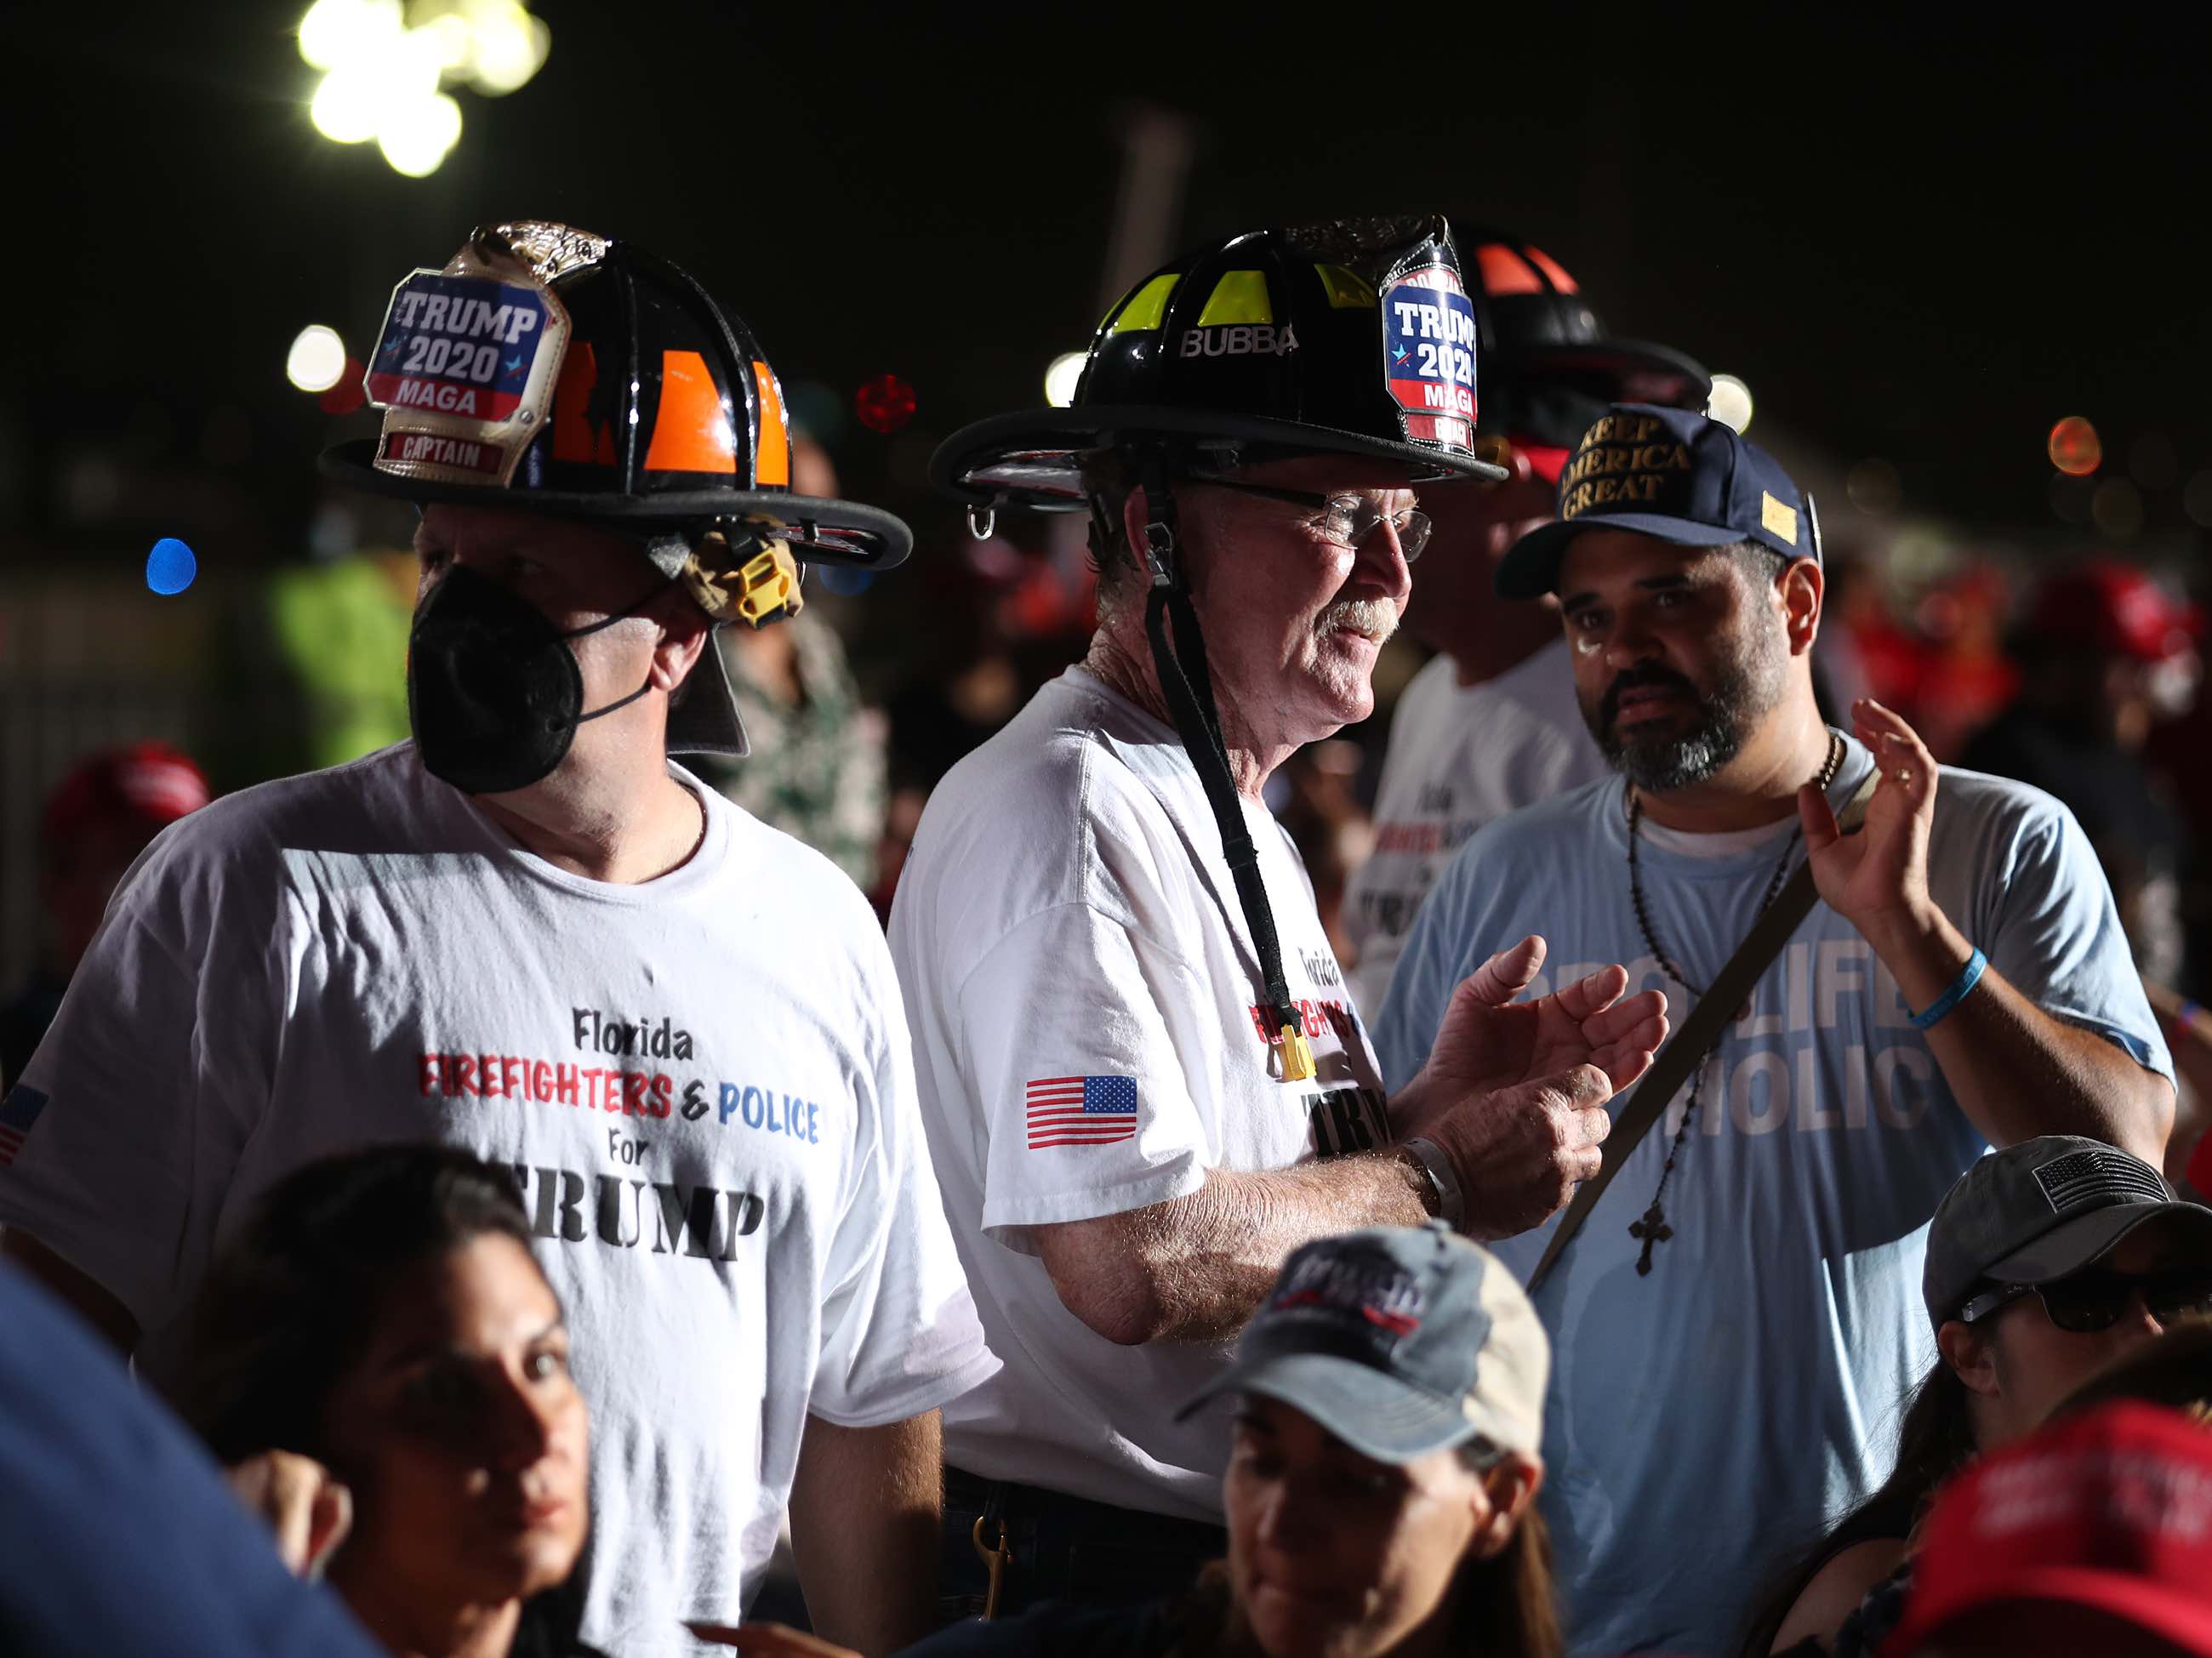 Firefighters at Miami rally (Joe Raedle / Getty)